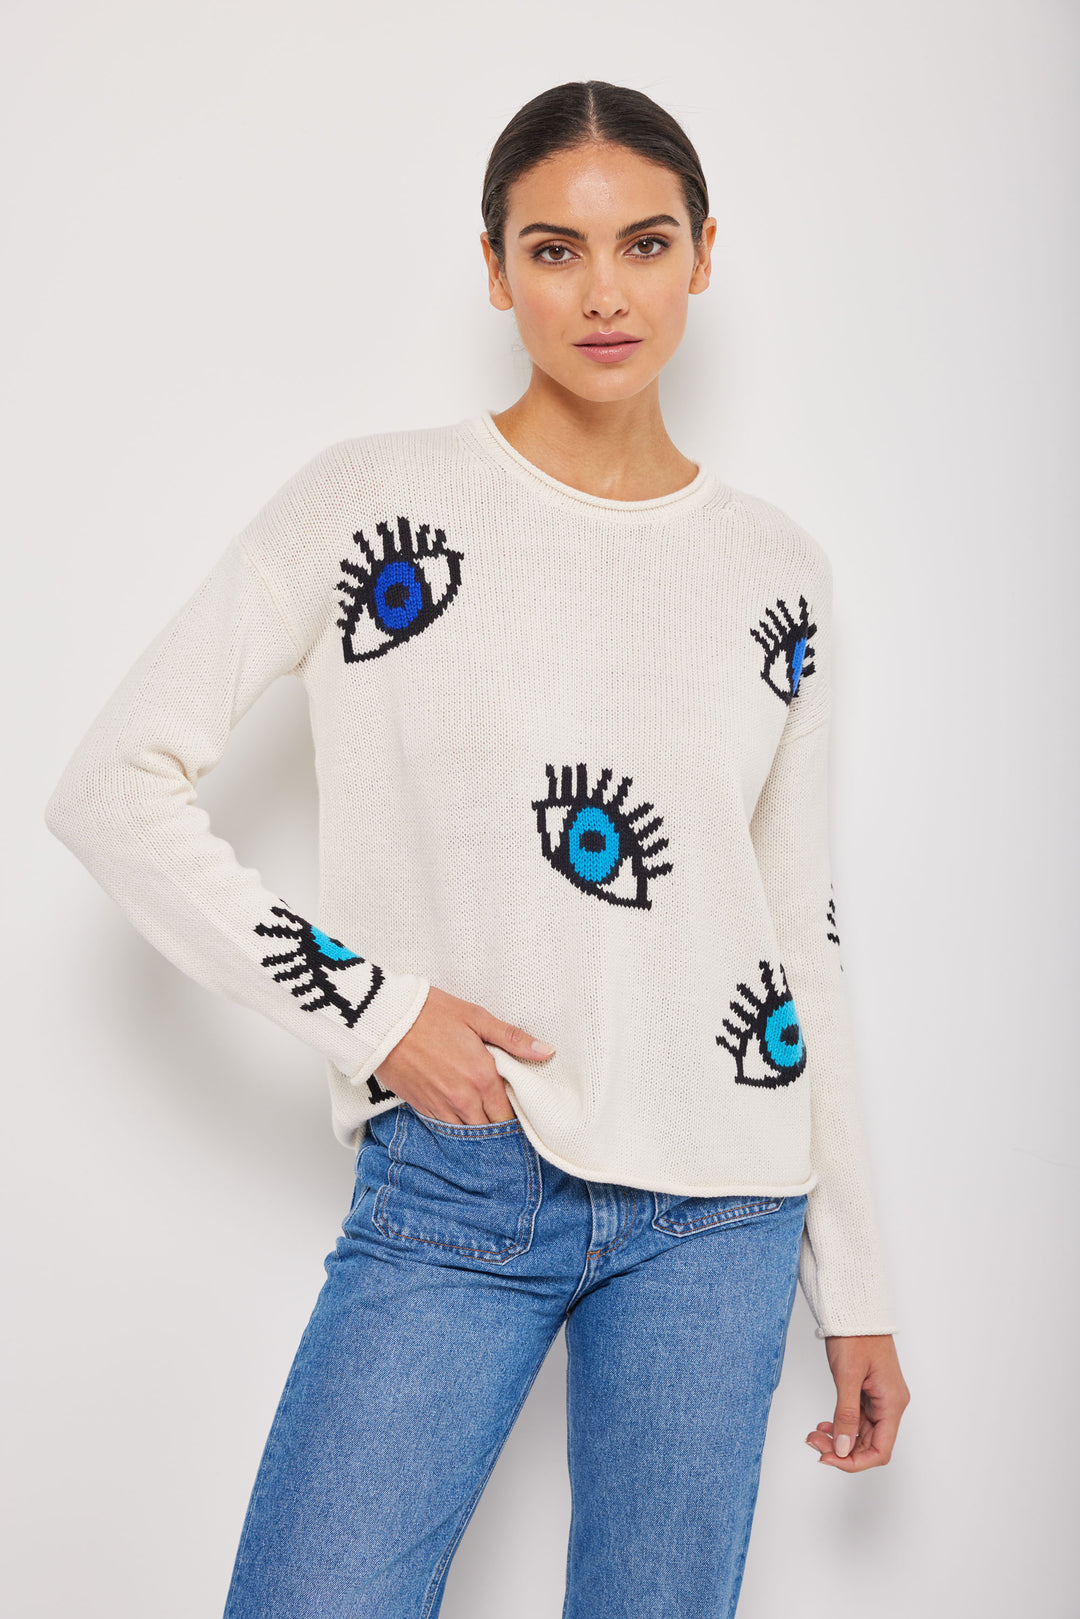 Lisa Todd Eyes On You Sweater